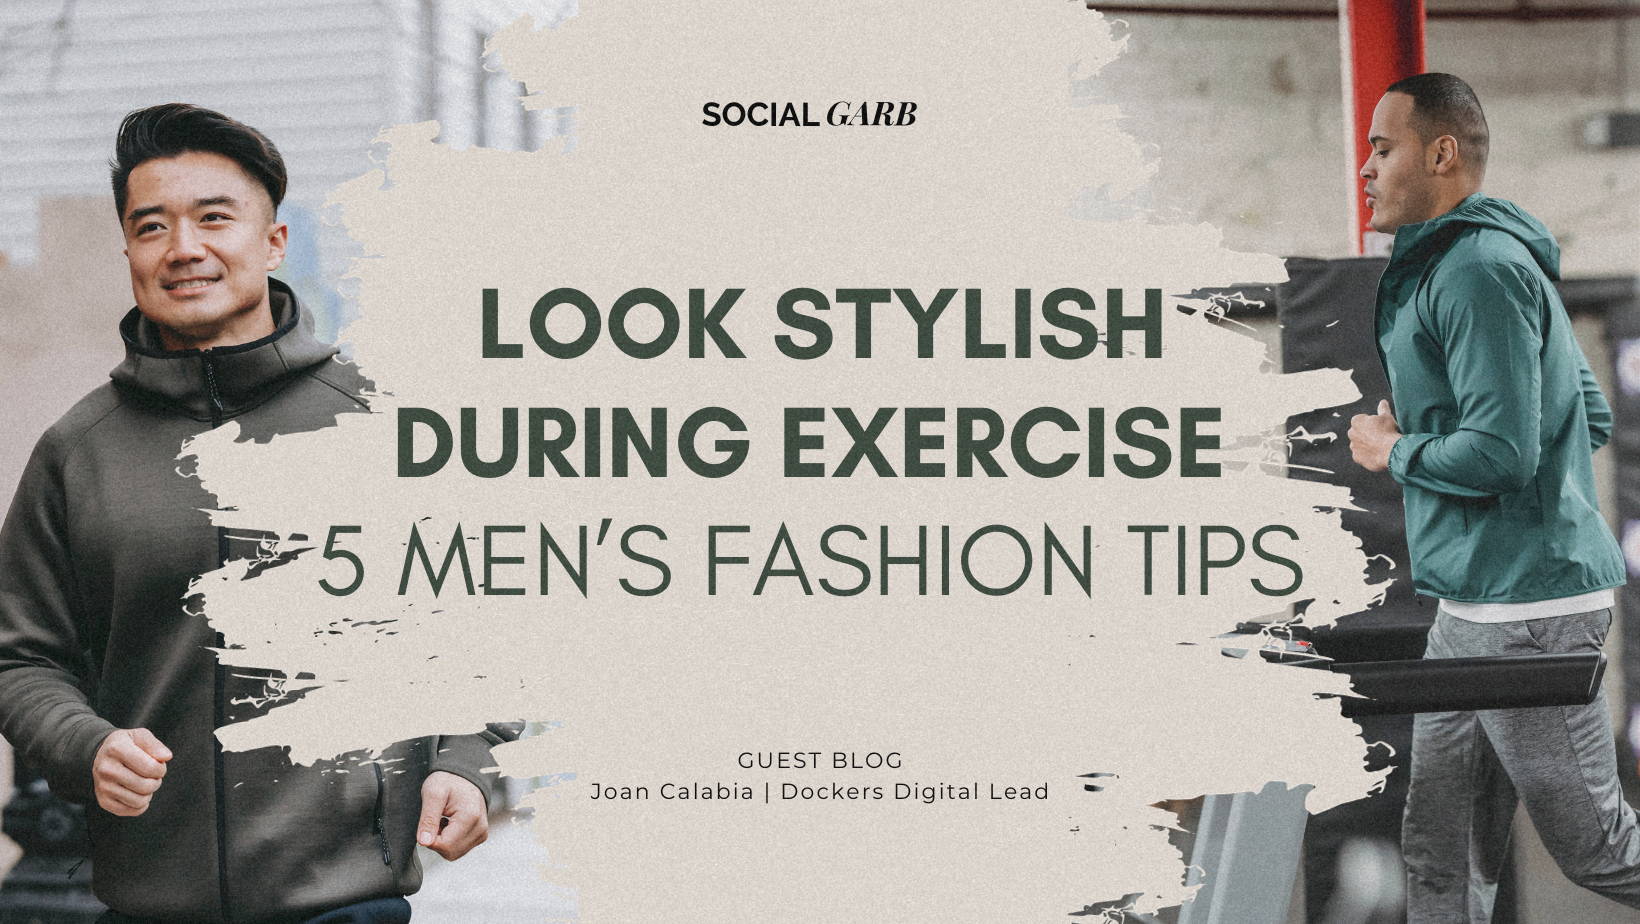 5 Men's Fashion Tips to Look Stylish During Exercise